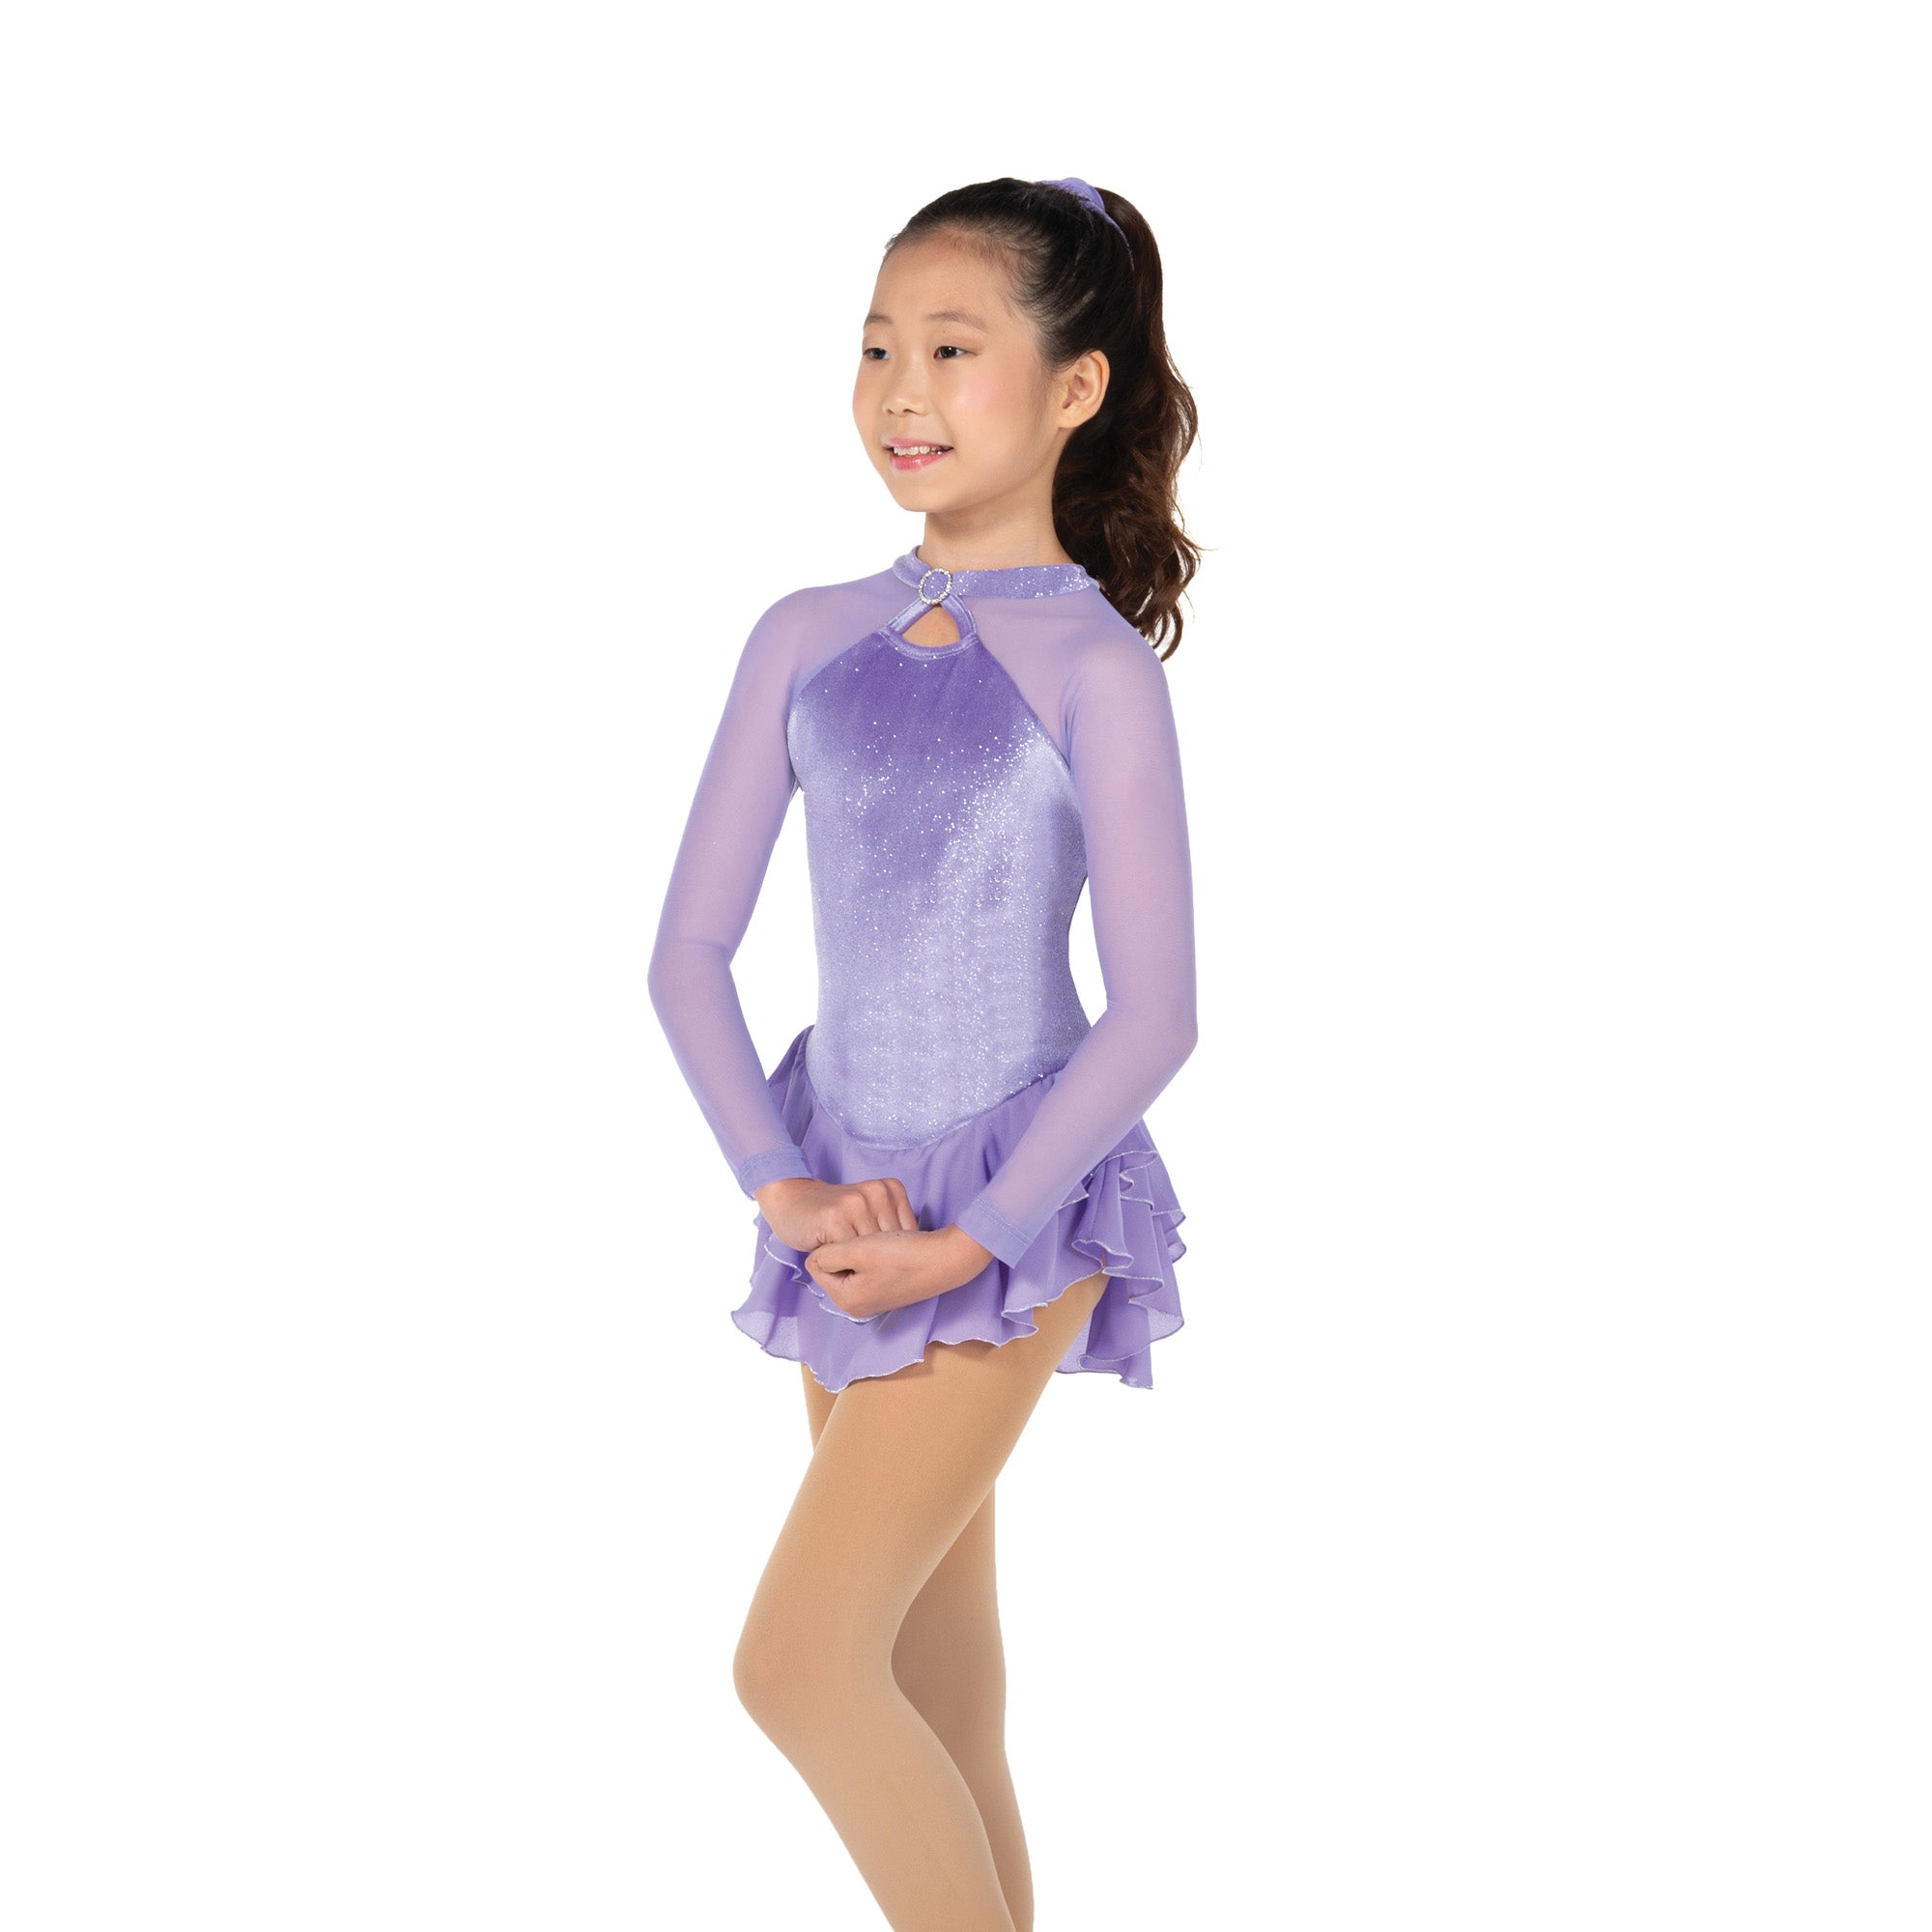 179 Shimmer Skating Dress in Lilac by Jerry's